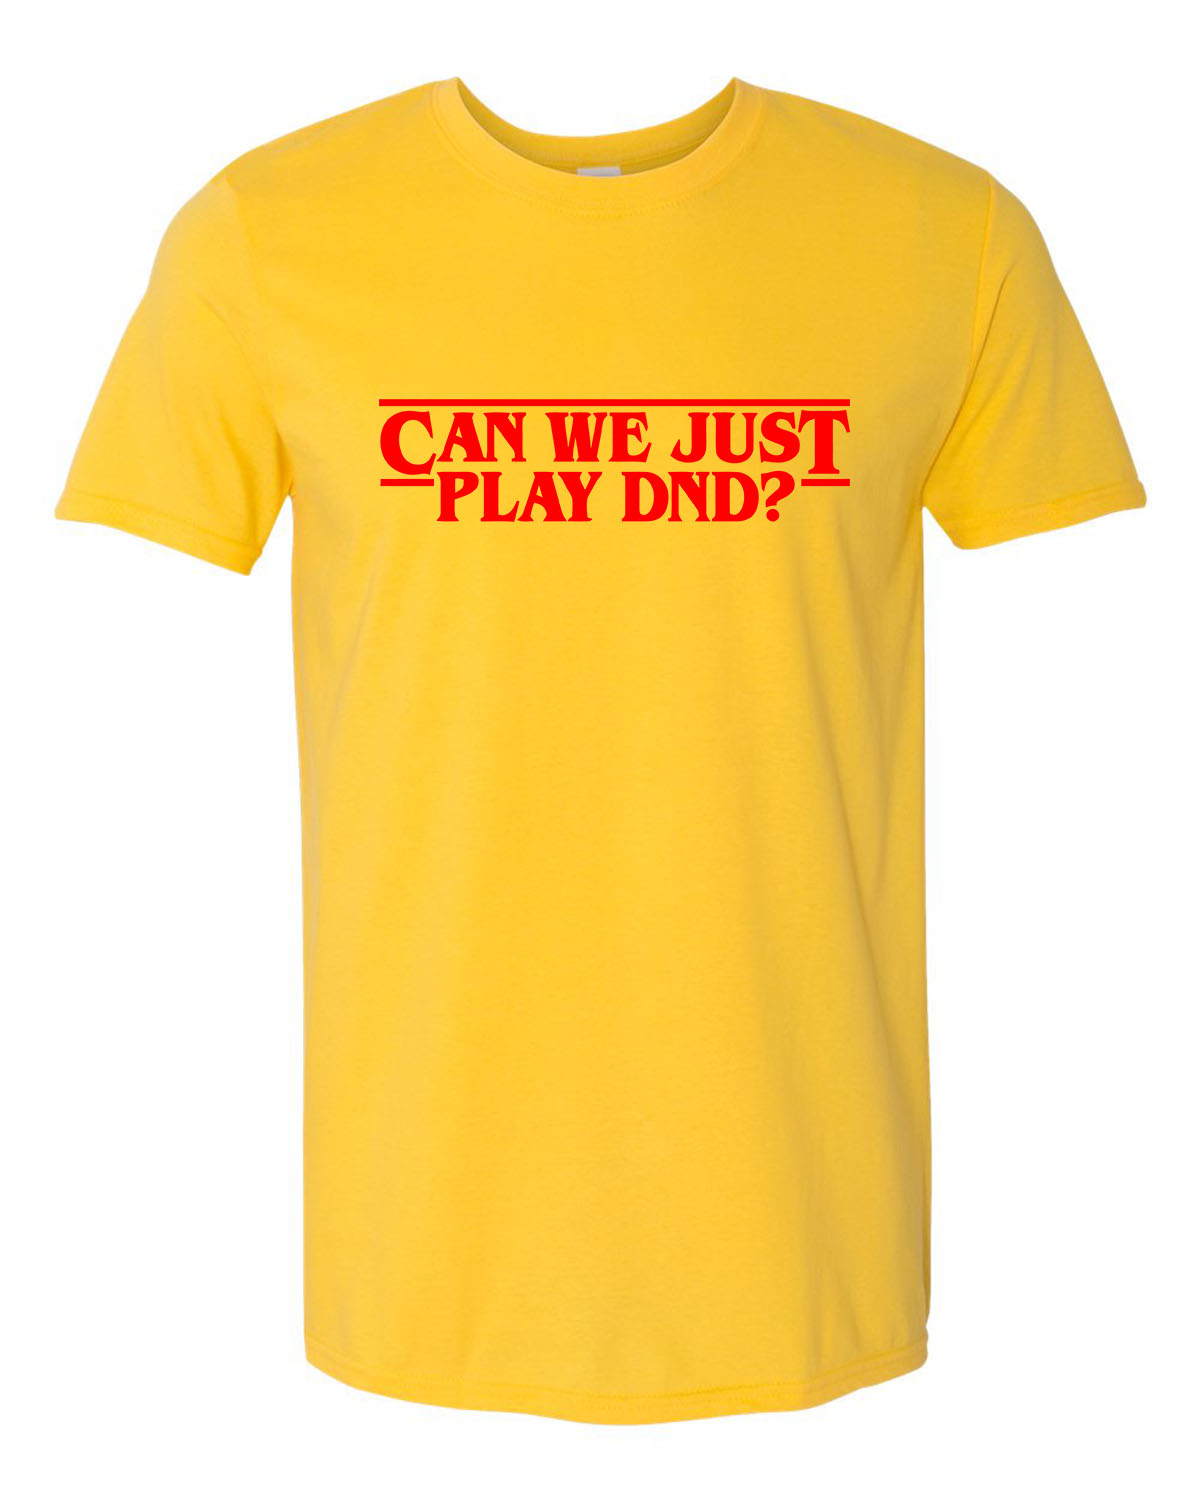 Can We Just Play DnD? Dungeons and Dragons Unisex T-Shirt